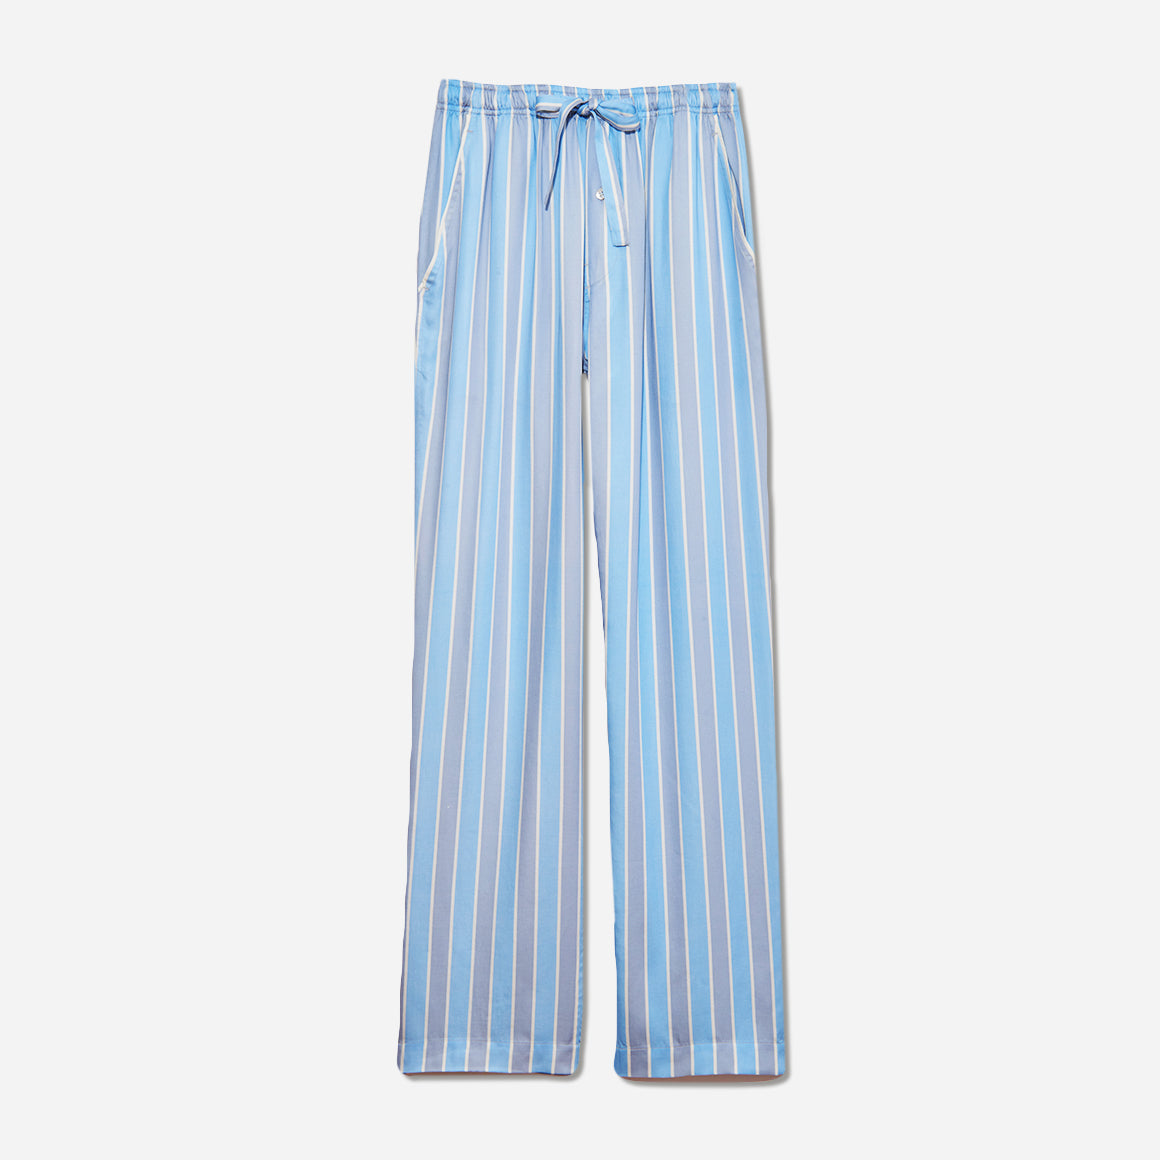 Our Tencel pajama pants feature a relaxed fit, providing ample room for movement and comfort while you sleep. The soft elastic waistband, drawstring, button fly, and side-seam pockets make this the perfect lounge pant for relaxing at home.